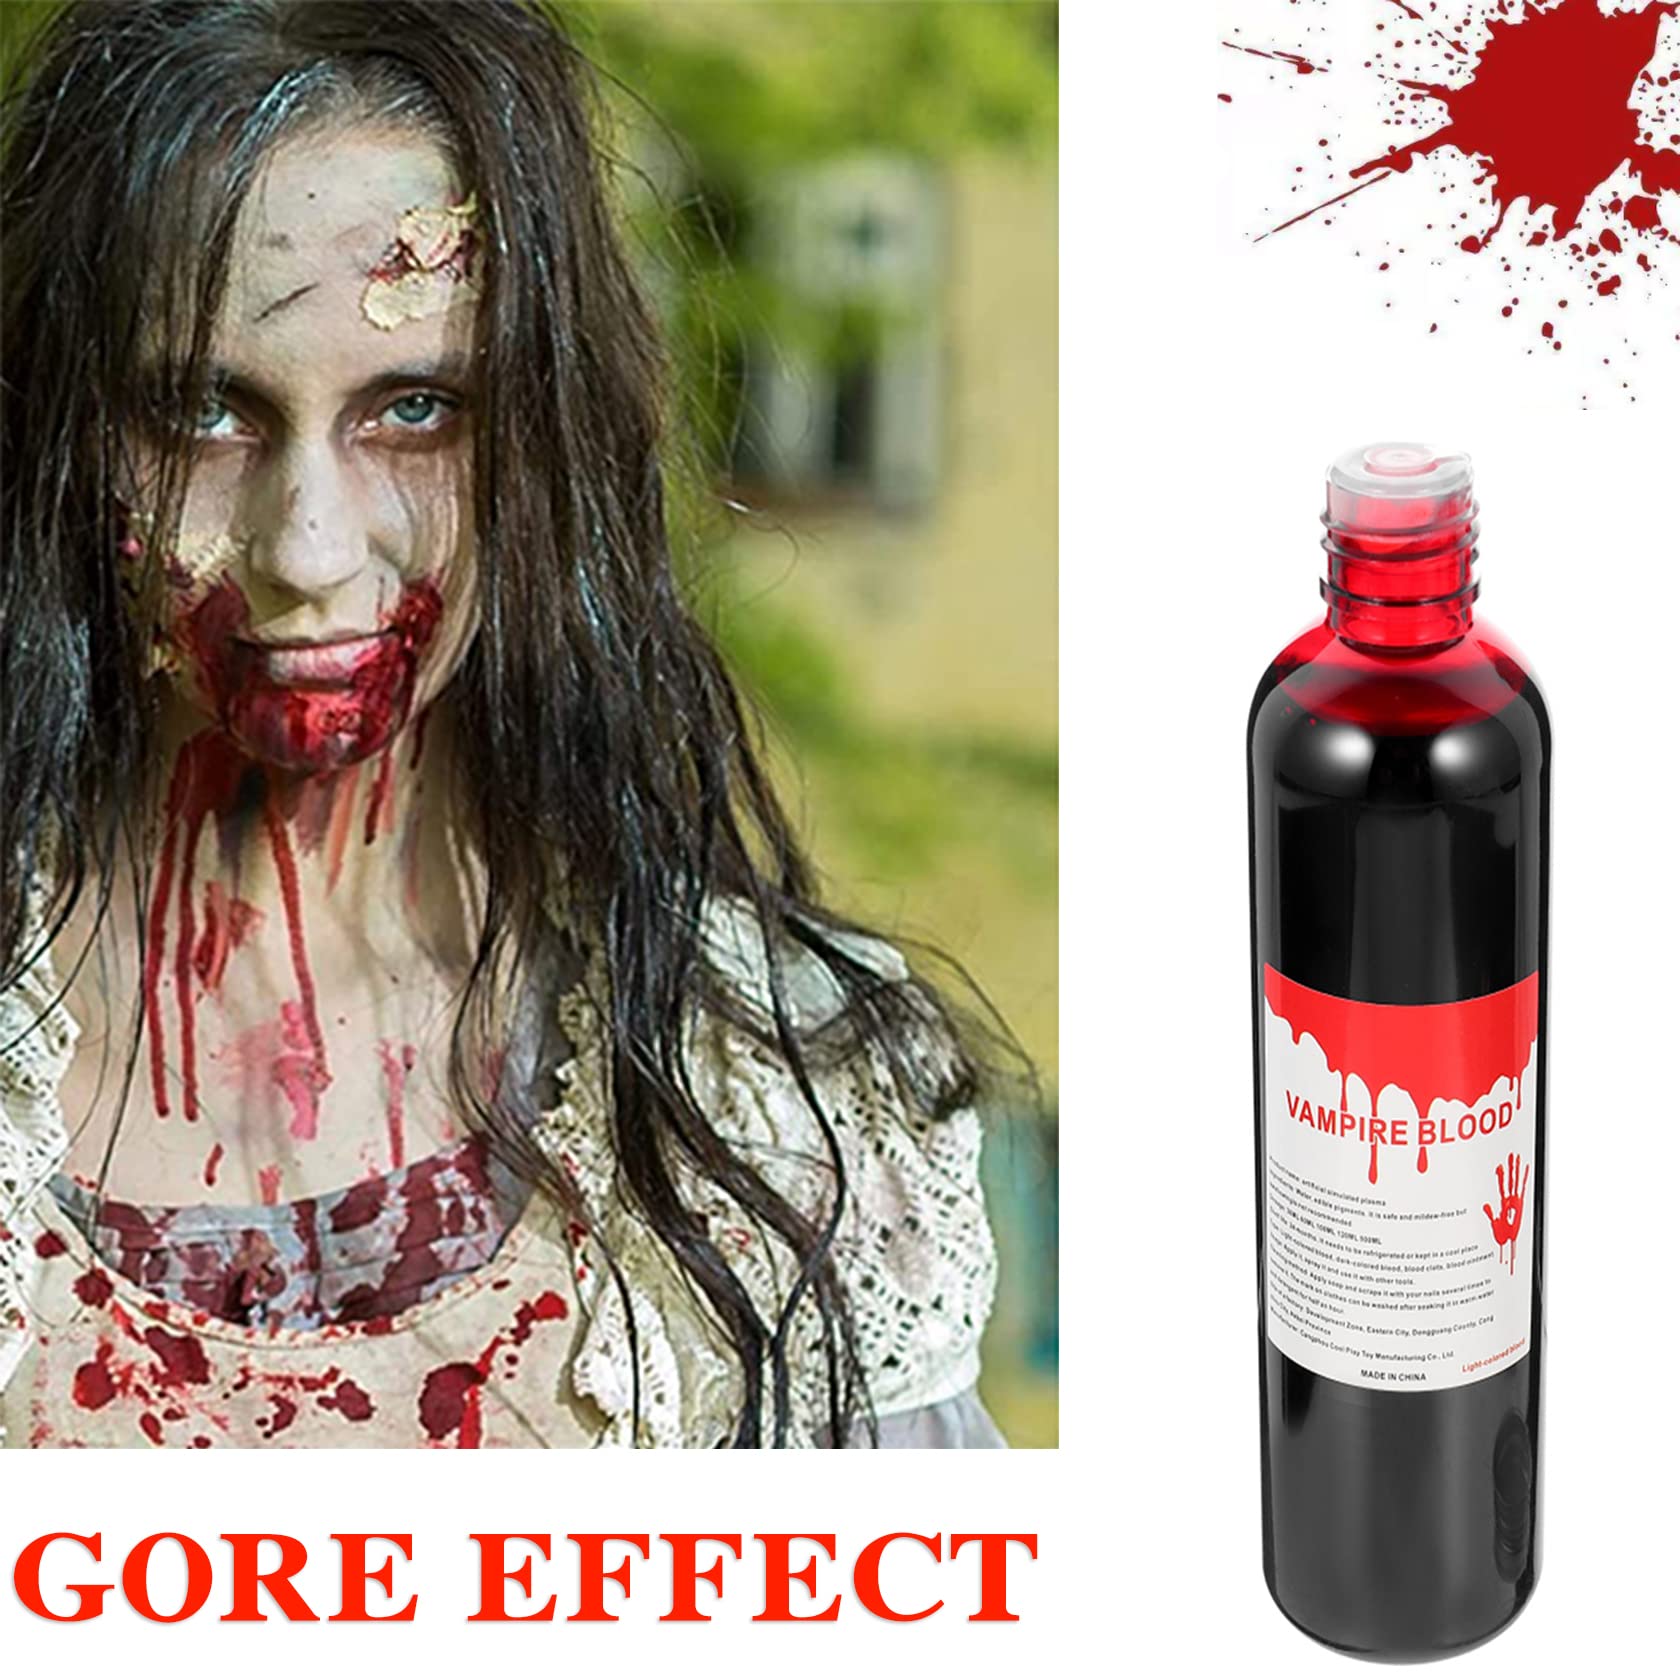 BKPPLZP Fake Blood Washable Makeup,1.01oz(30ML) Halloween Fake Liquid Blood for Zombie Bride,Clothes,Monster SFX Scary Clown and Vampire Makeup & Monster Dress Up Cosplay,1 Pack